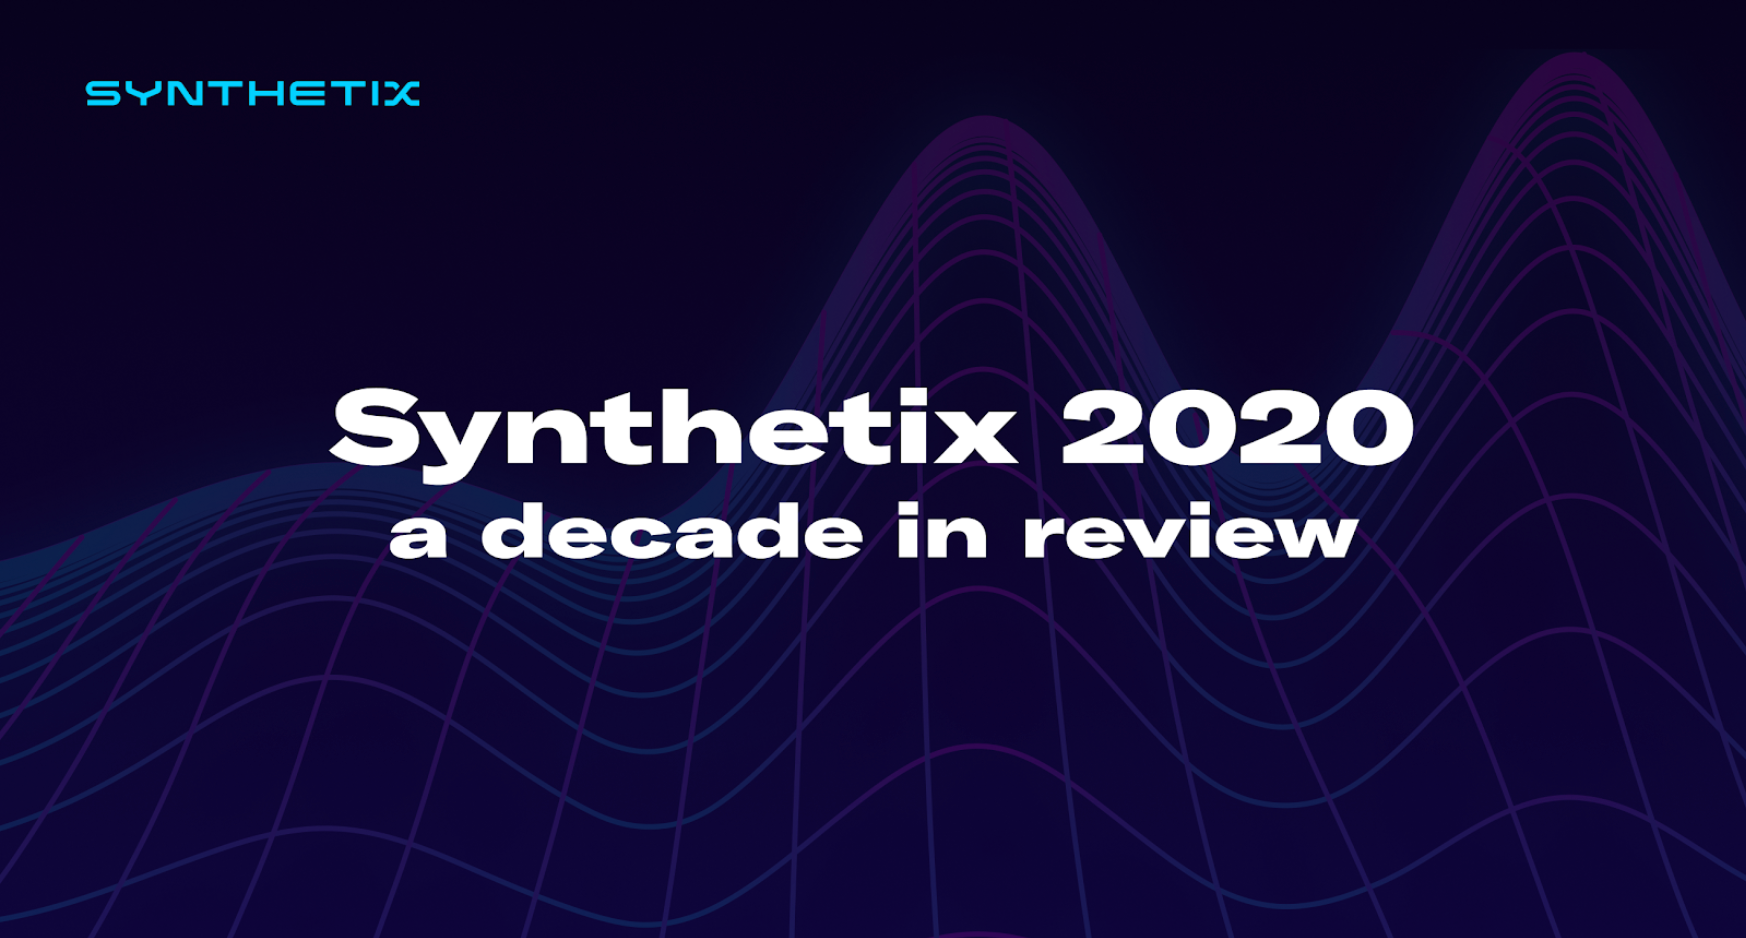 Synthetix 2020 - A decade in review